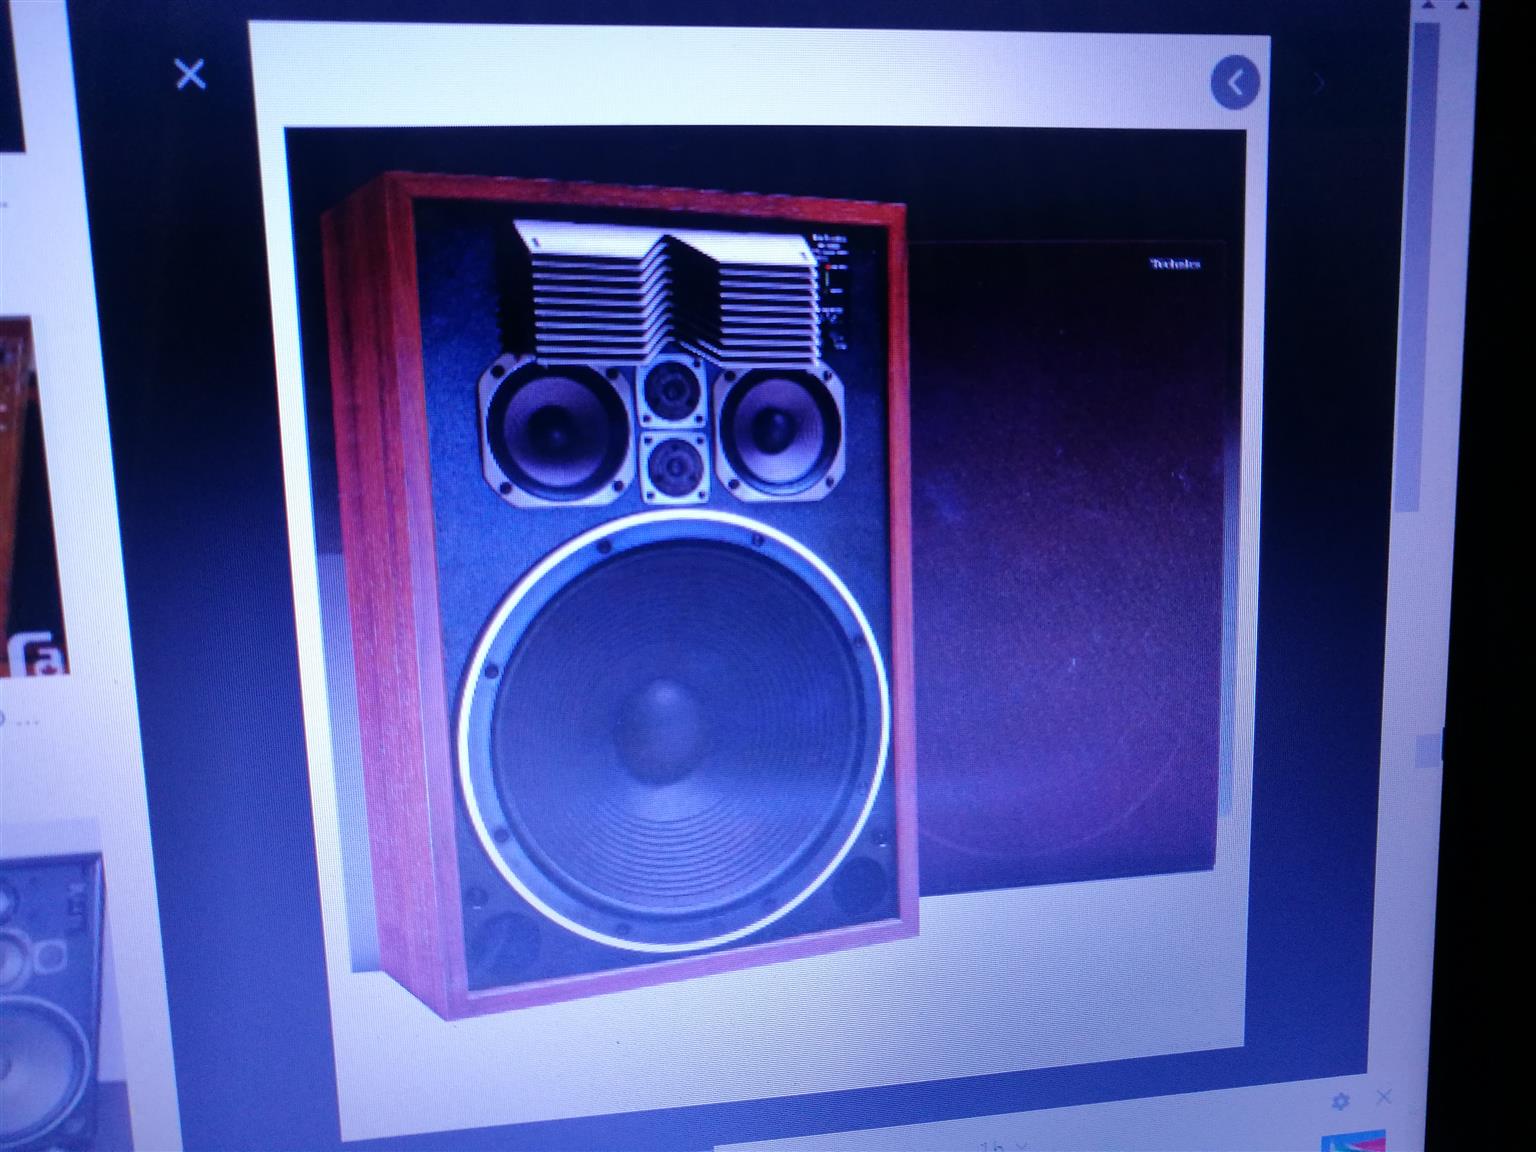  In search of Vintage audios (Amps and speakers), including loose speakers 